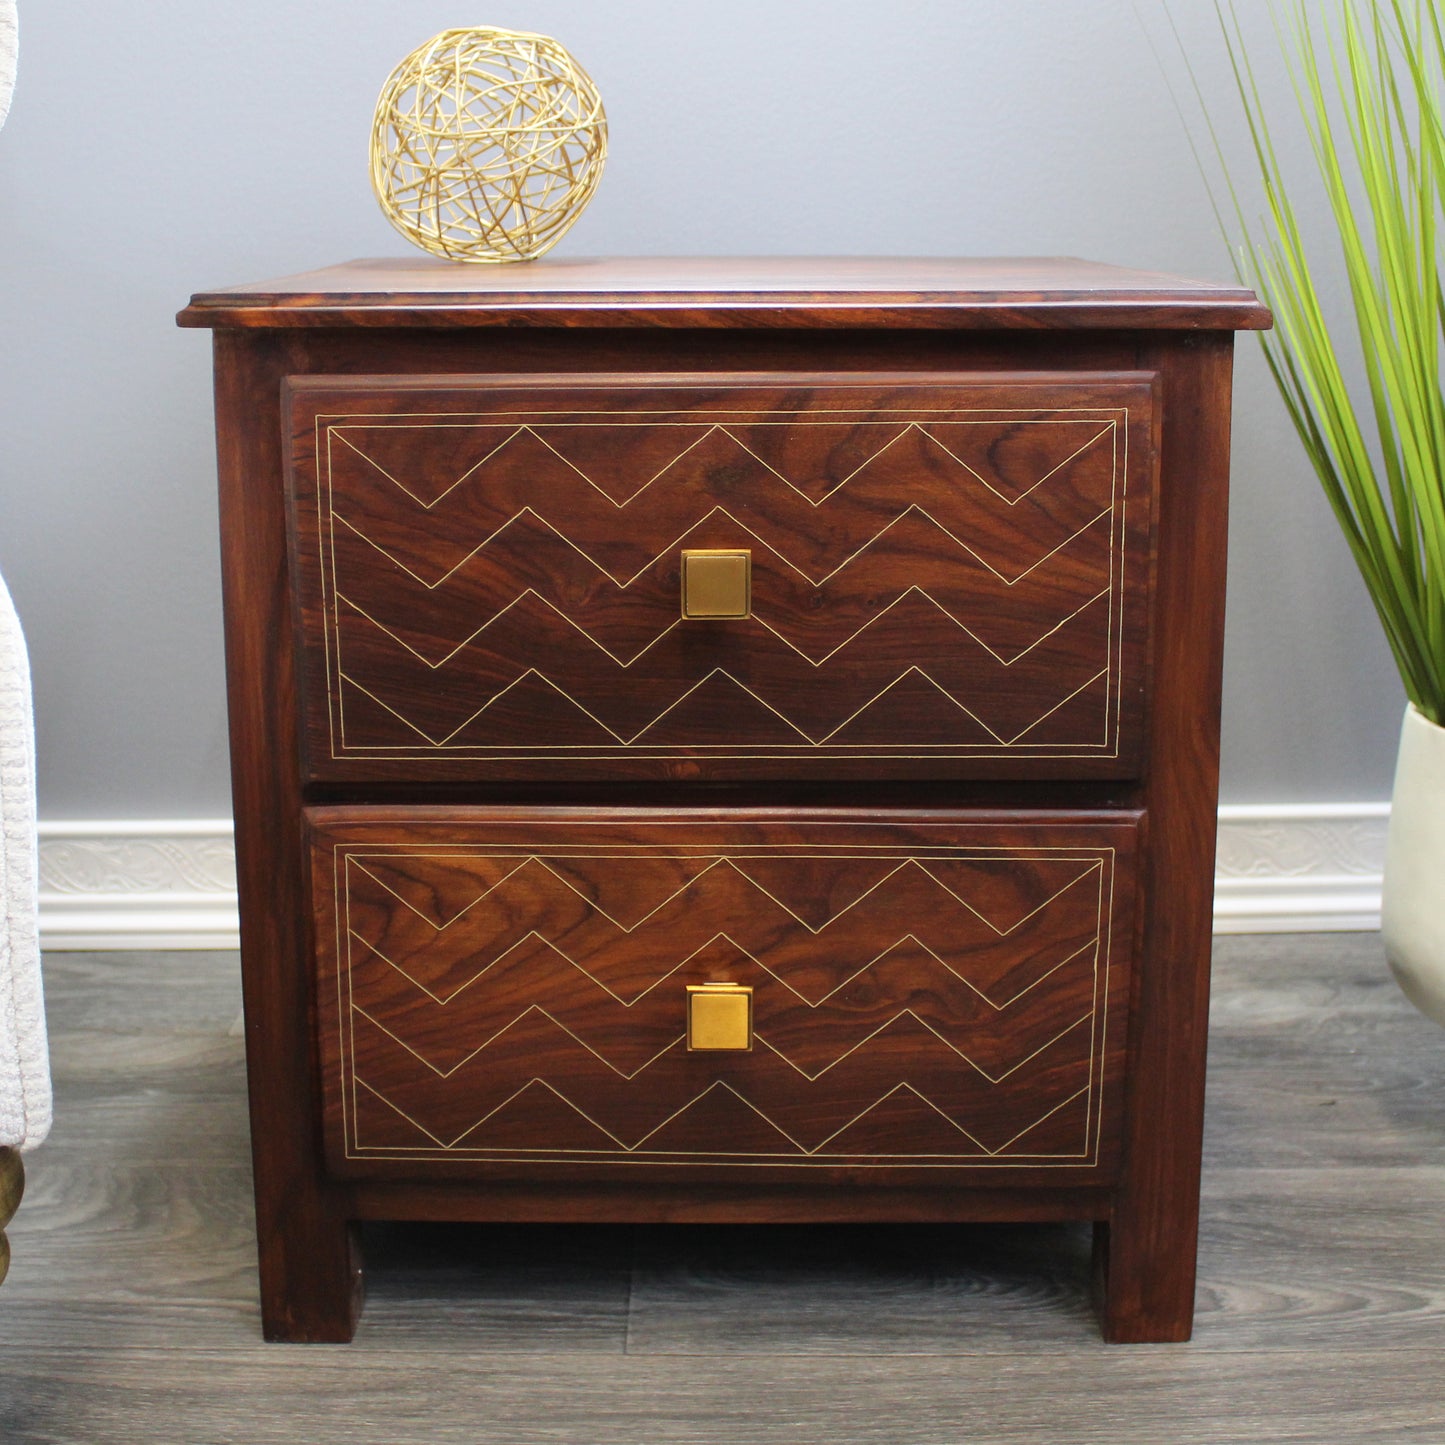 Natural Geo Rosewood Square Wooden End Table - Chevron Golden Brass Inlay